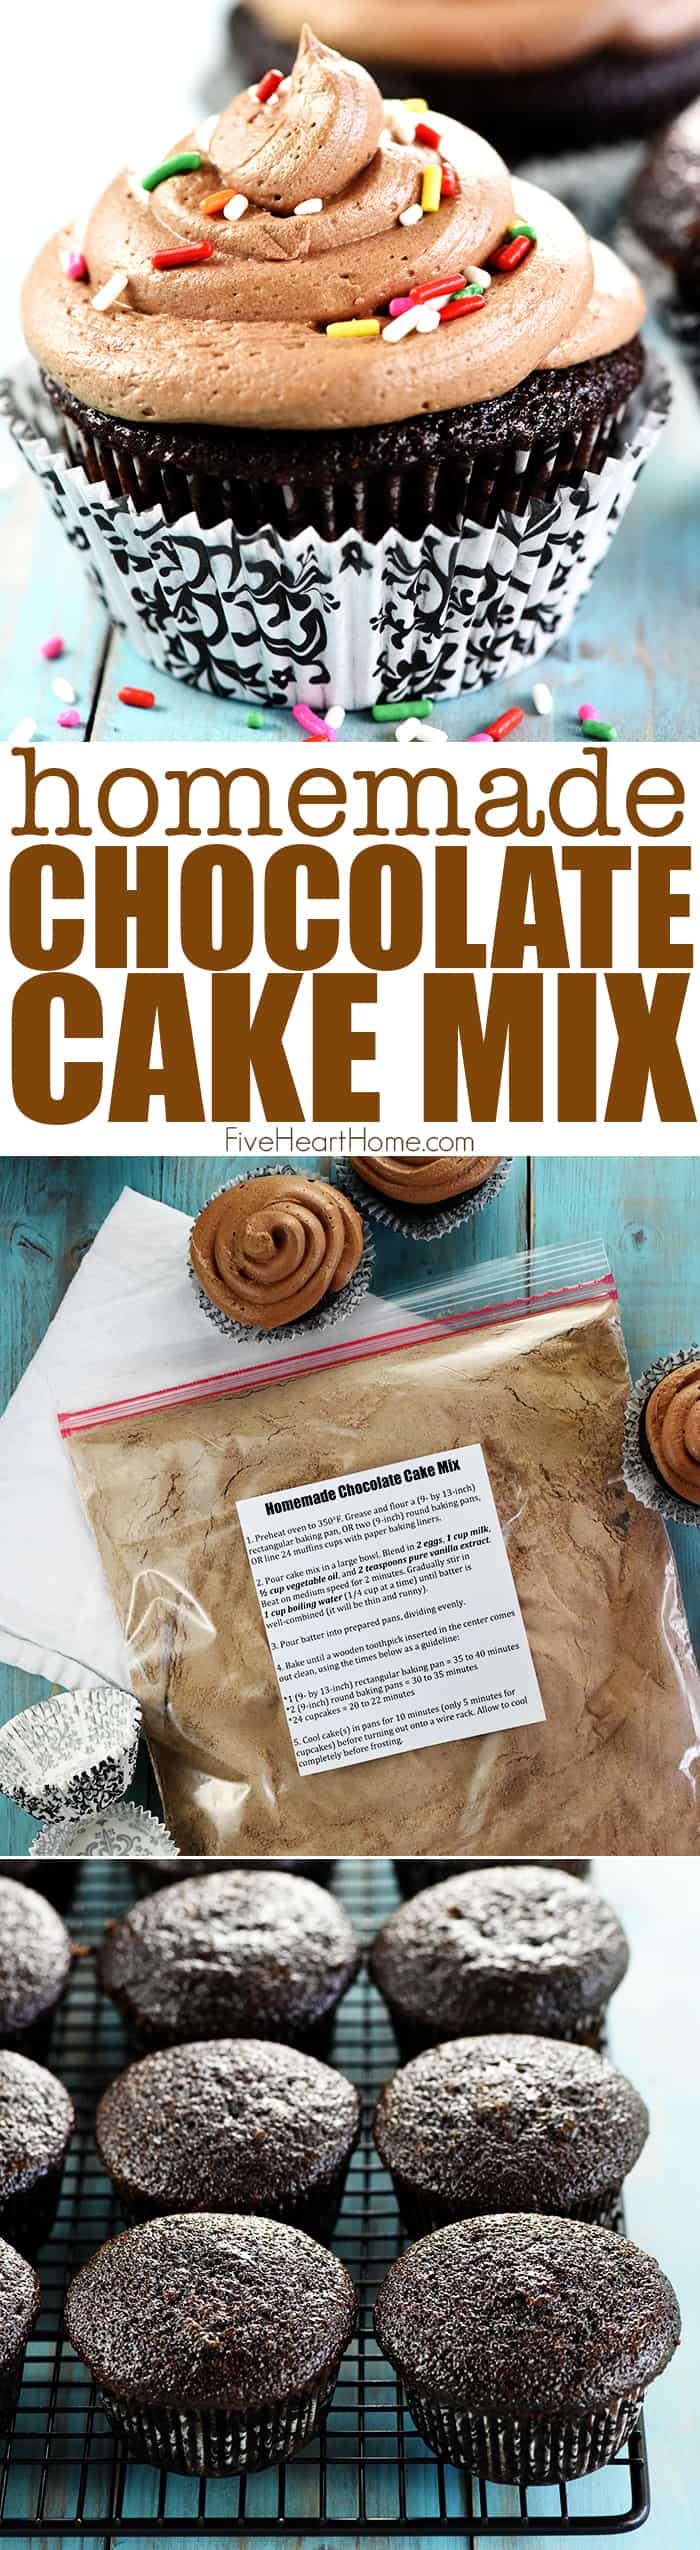 Homemade Chocolate Cake Mix ~ an easy, from-scratch pantry staple to whip up light, moist chocolate cake or cupcakes in a matter of minutes! | FiveHeartHome.com via @fivehearthome